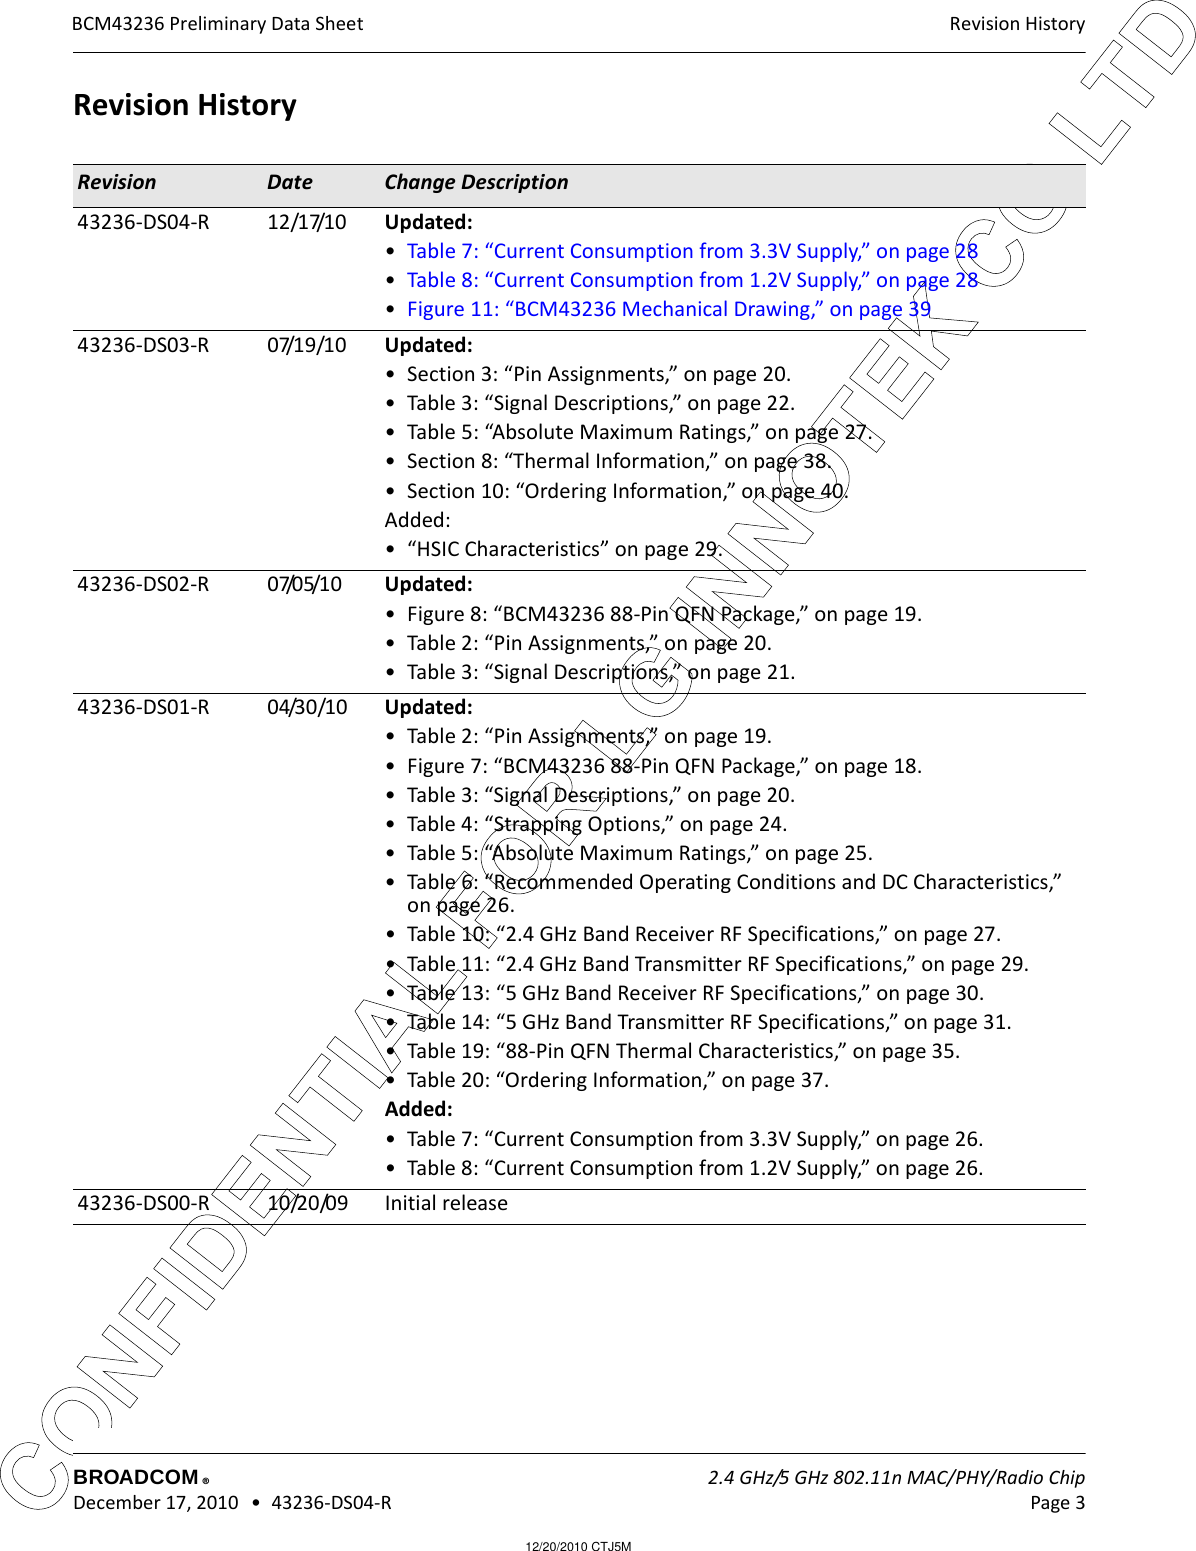 12/20/2010 CTJ5MCONFIDENTIAL FOR LG INNOTEK CO LTD Revision HistoryBROADCOM    2.4 GHz/5 GHz 802.11n MAC/PHY/Radio Chip December 17, 2010   •  43236-DS04-R Page 3®BCM43236 Preliminary Data SheetRevision HistoryRevision Date Change Description43236-DS04-R 12/17/10 Updated:•Table 7: “Current Consumption from 3.3V Supply,” on page 28•Table 8: “Current Consumption from 1.2V Supply,” on page 28•Figure 11: “BCM43236 Mechanical Drawing,” on page 3943236-DS03-R 07/19/10 Updated:• Section 3: “Pin Assignments,” on page 20.• Table 3: “Signal Descriptions,” on page 22.• Table 5: “Absolute Maximum Ratings,” on page 27.• Section 8: “Thermal Information,” on page 38.• Section 10: “Ordering Information,” on page 40.Added:• “HSIC Characteristics” on page 29.43236-DS02-R 07/05/10 Updated:• Figure 8: “BCM43236 88-Pin QFN Package,” on page 19.• Table 2: “Pin Assignments,” on page 20.• Table 3: “Signal Descriptions,” on page 21.43236-DS01-R 04/30/10 Updated:• Table 2: “Pin Assignments,” on page 19.• Figure 7: “BCM43236 88-Pin QFN Package,” on page 18.• Table 3: “Signal Descriptions,” on page 20.• Table 4: “Strapping Options,” on page 24.• Table 5: “Absolute Maximum Ratings,” on page 25.• Table 6: “Recommended Operating Conditions and DC Characteristics,” on page 26.• Table 10: “2.4 GHz Band Receiver RF Specifications,” on page 27.• Table 11: “2.4 GHz Band Transmitter RF Specifications,” on page 29.• Table 13: “5 GHz Band Receiver RF Specifications,” on page 30.• Table 14: “5 GHz Band Transmitter RF Specifications,” on page 31.• Table 19: “88-Pin QFN Thermal Characteristics,” on page 35.• Table 20: “Ordering Information,” on page 37.Added:• Table 7: “Current Consumption from 3.3V Supply,” on page 26.• Table 8: “Current Consumption from 1.2V Supply,” on page 26.43236-DS00-R 10/20/09 Initial release